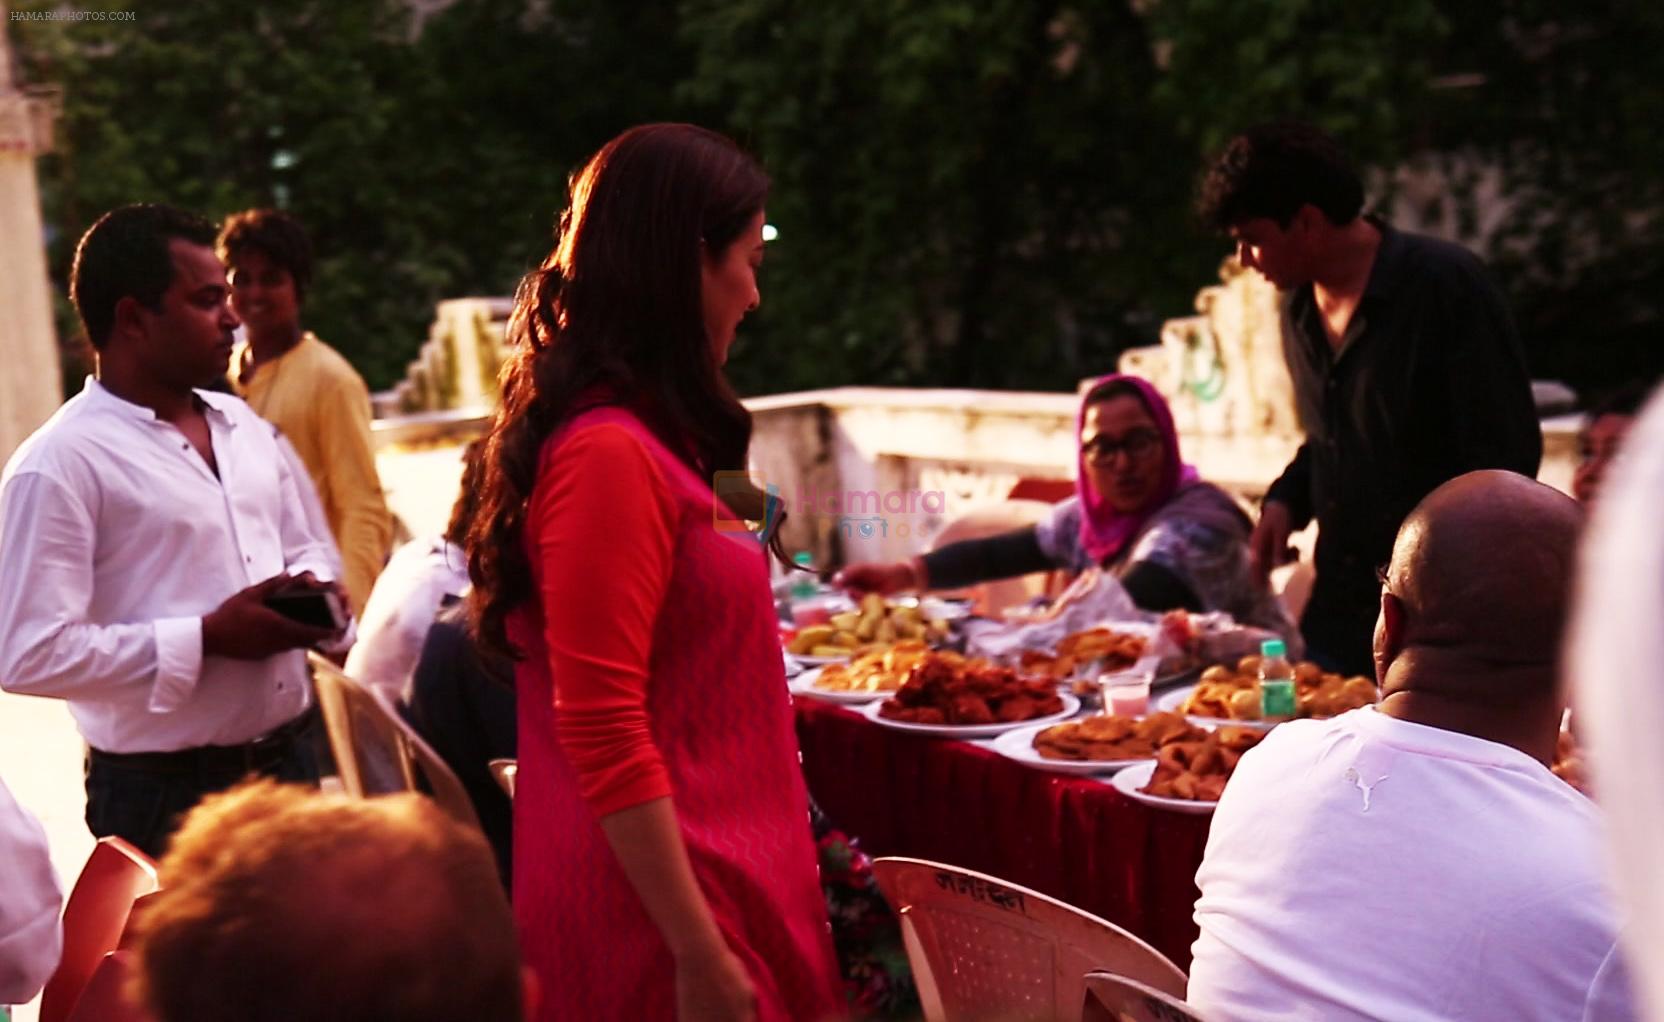 Juhi Chawla alongwith Crew members at Iftaar party during the shoot of Surani Pictures  _Chalk N Duster_.